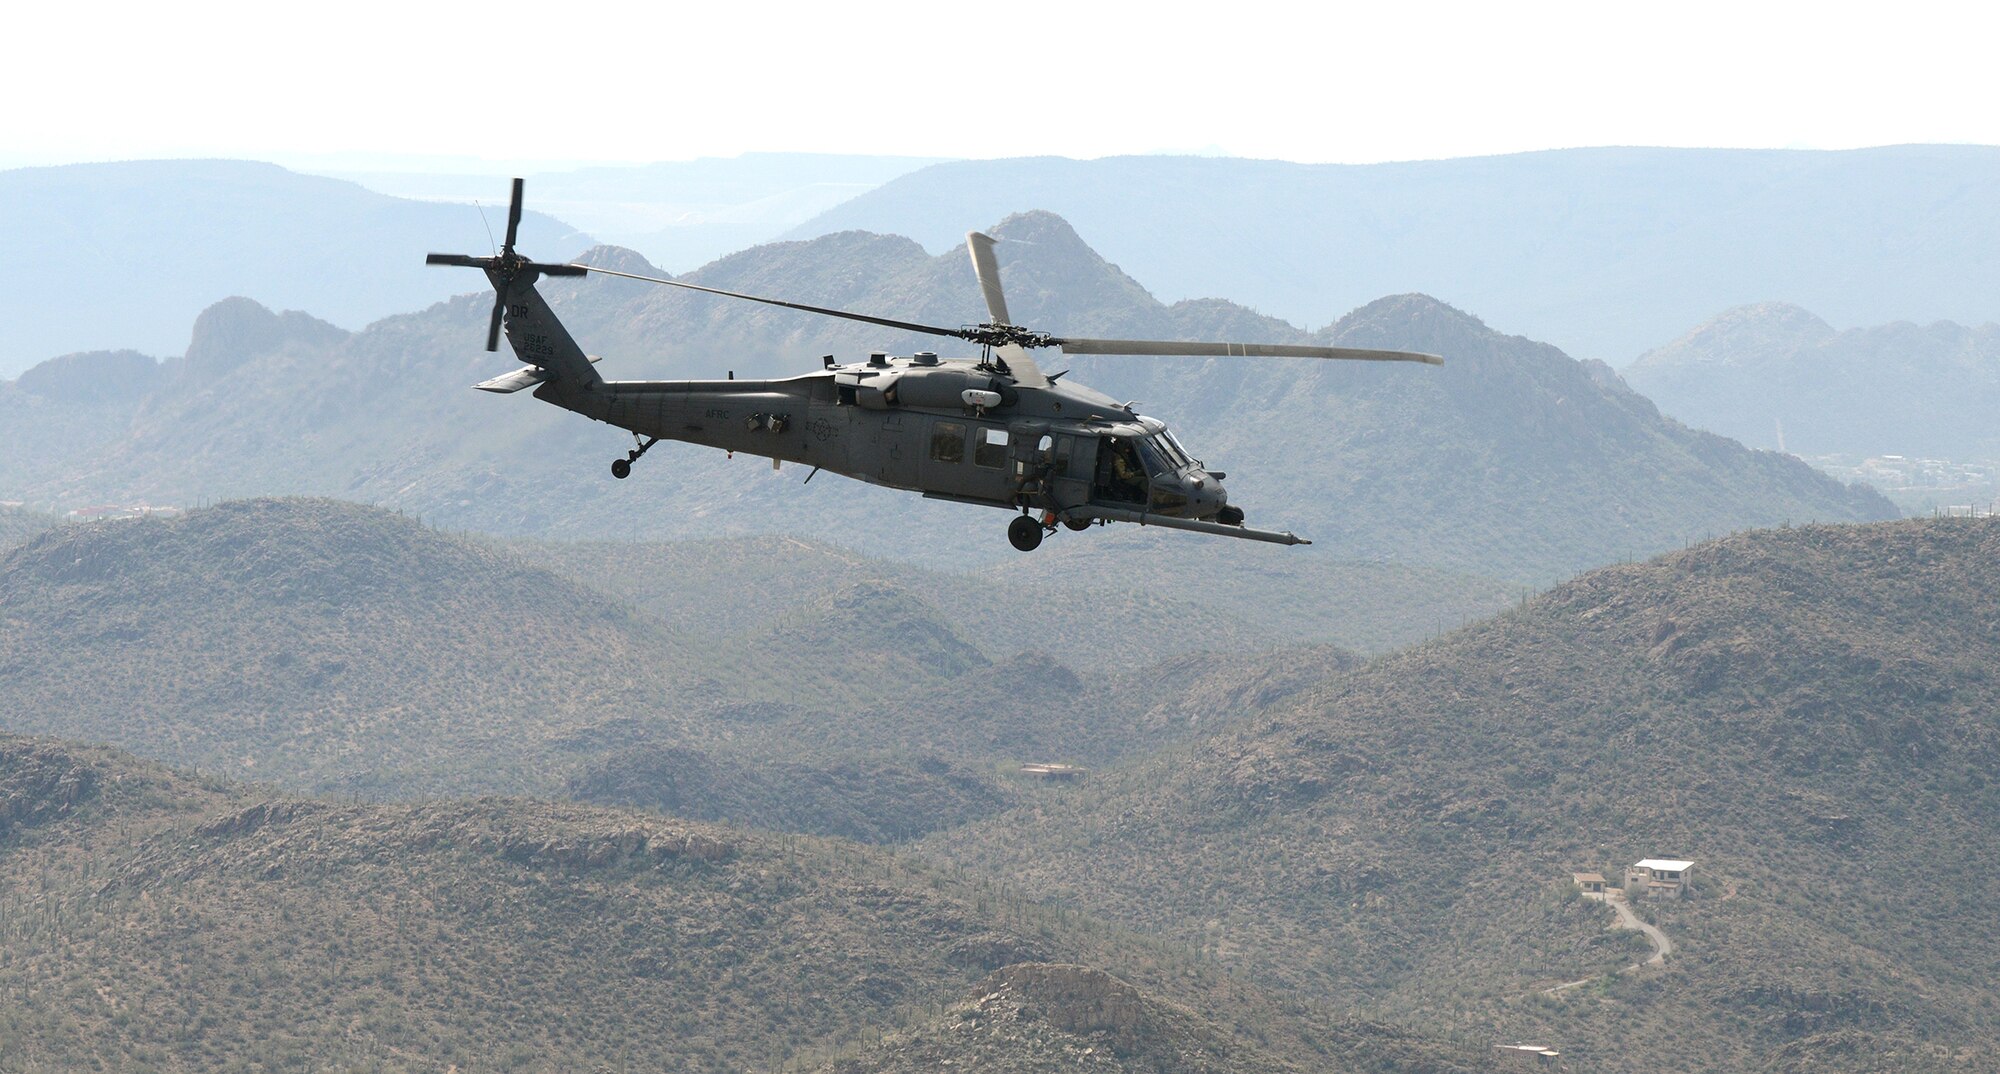 DAVIS-MONTHAN AIR FORCE BASE, Ariz. – A 305th Rescue Squadron HH-60G Pave Hawk helicopter flies across the Southern Arizona desert during a training mission March 4.  The 305th RQS is assigned to the 943rd Rescue Group, which is assigned to the 920th Rescue Wing, Patrick AFB, Fla. The 943rd RQG trains and equips Citizen Airmen to perform personnel recovery operations worldwide. (U.S. Air Force photo/Tech. Sgt. Frank Oliver)